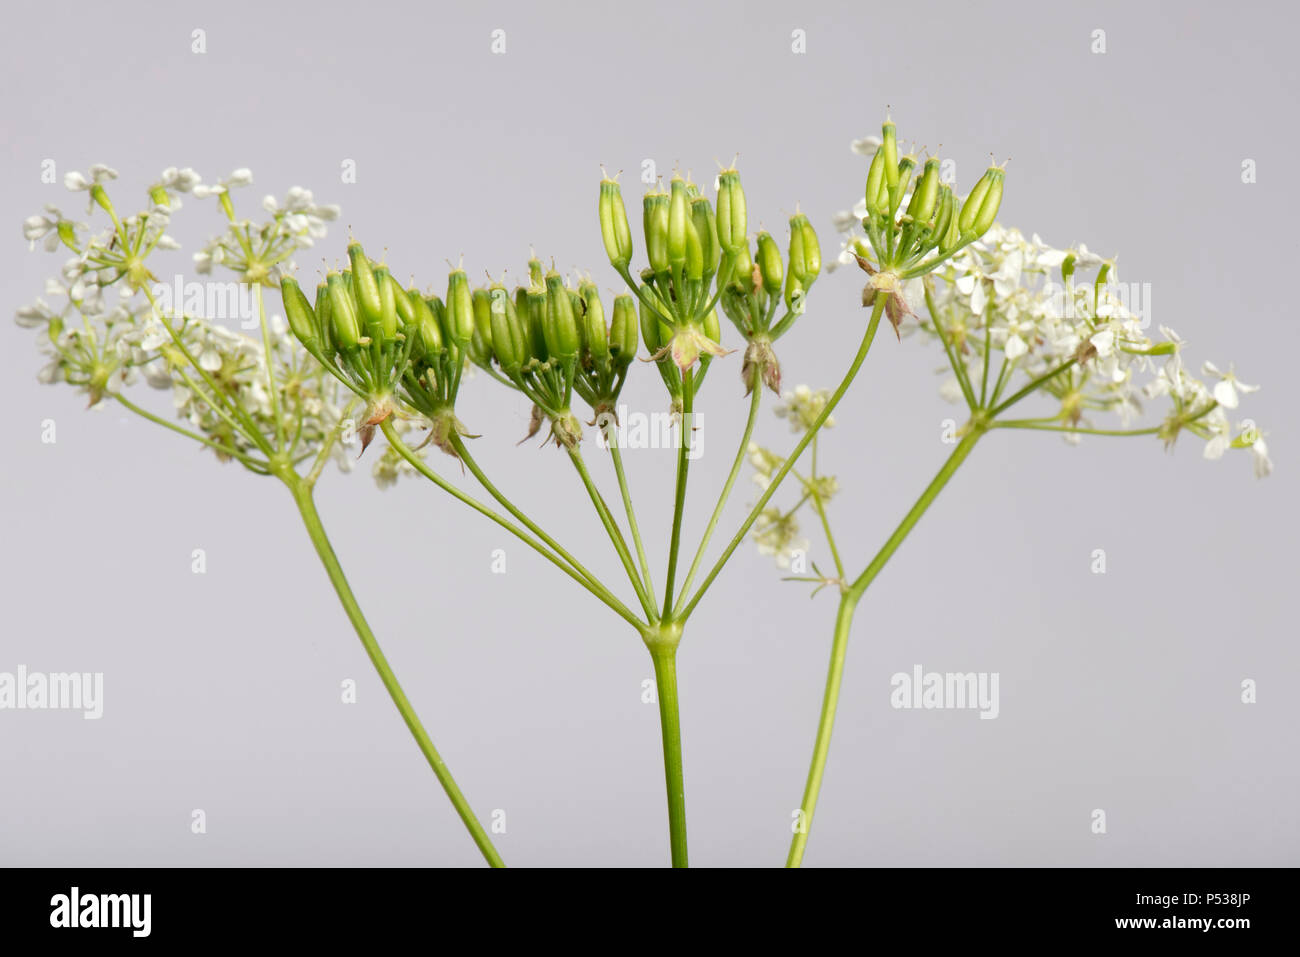 Cow parsley, Anthriscus sylvestris, flower umbel and seeding pods Stock Photo